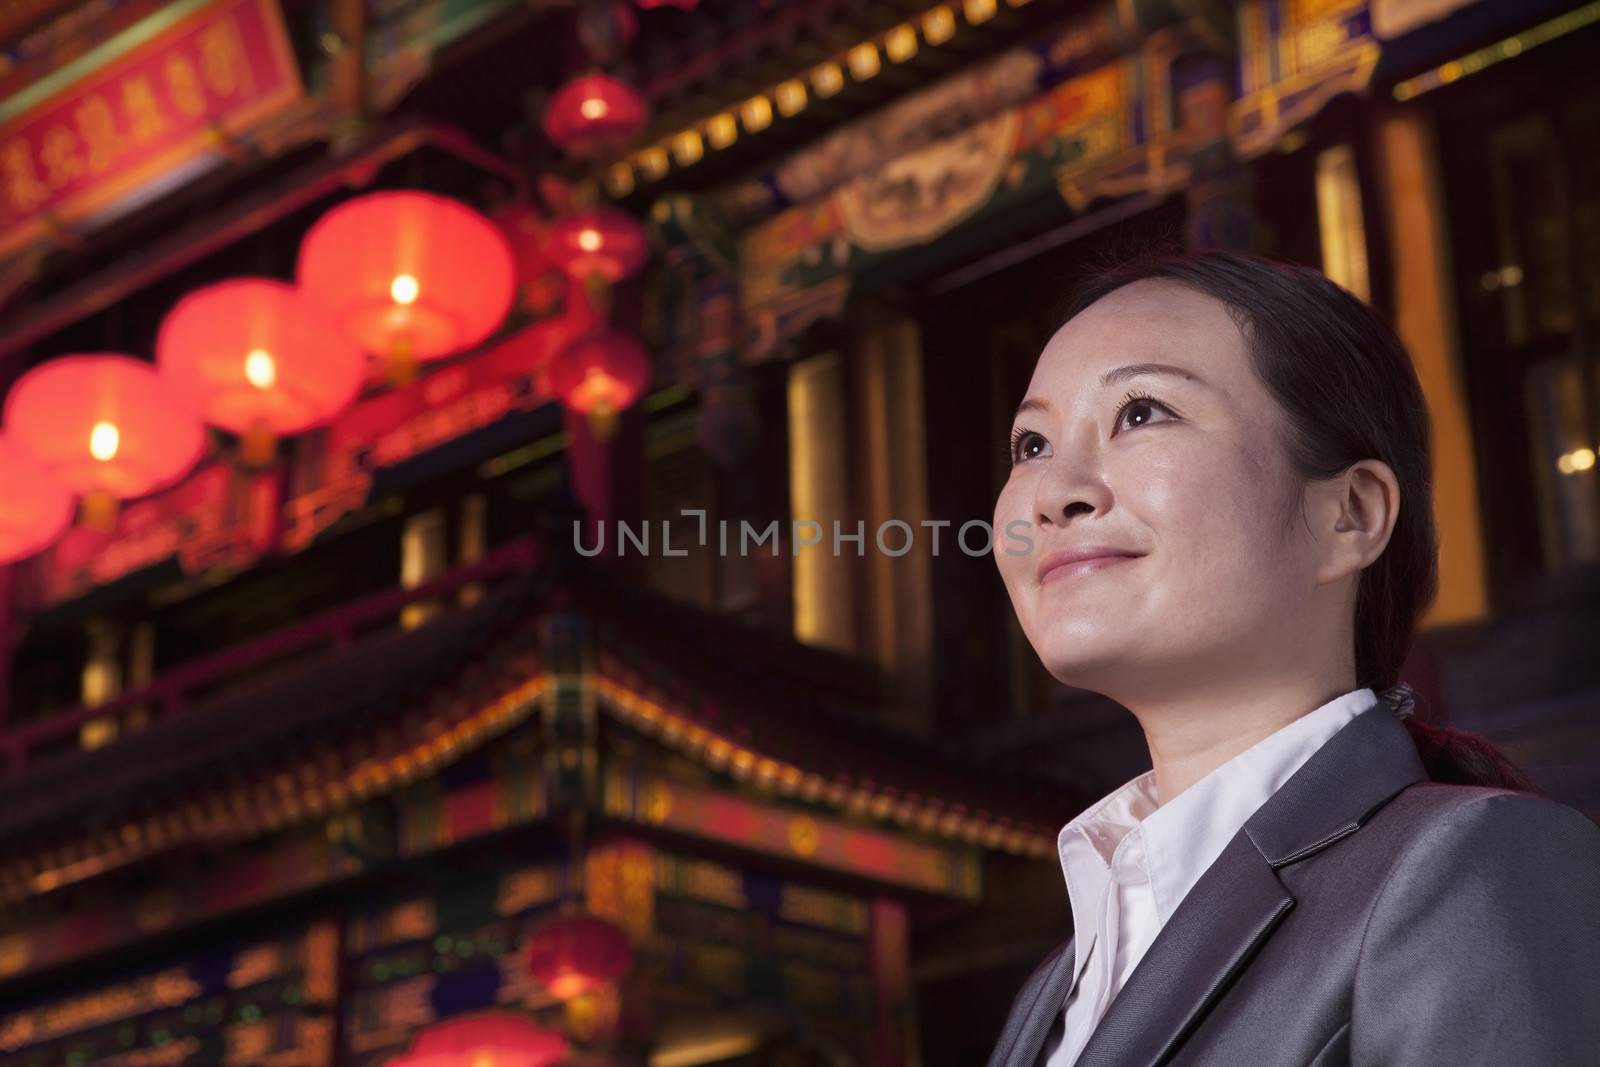 Businesswomen with Chinese architecture in background.